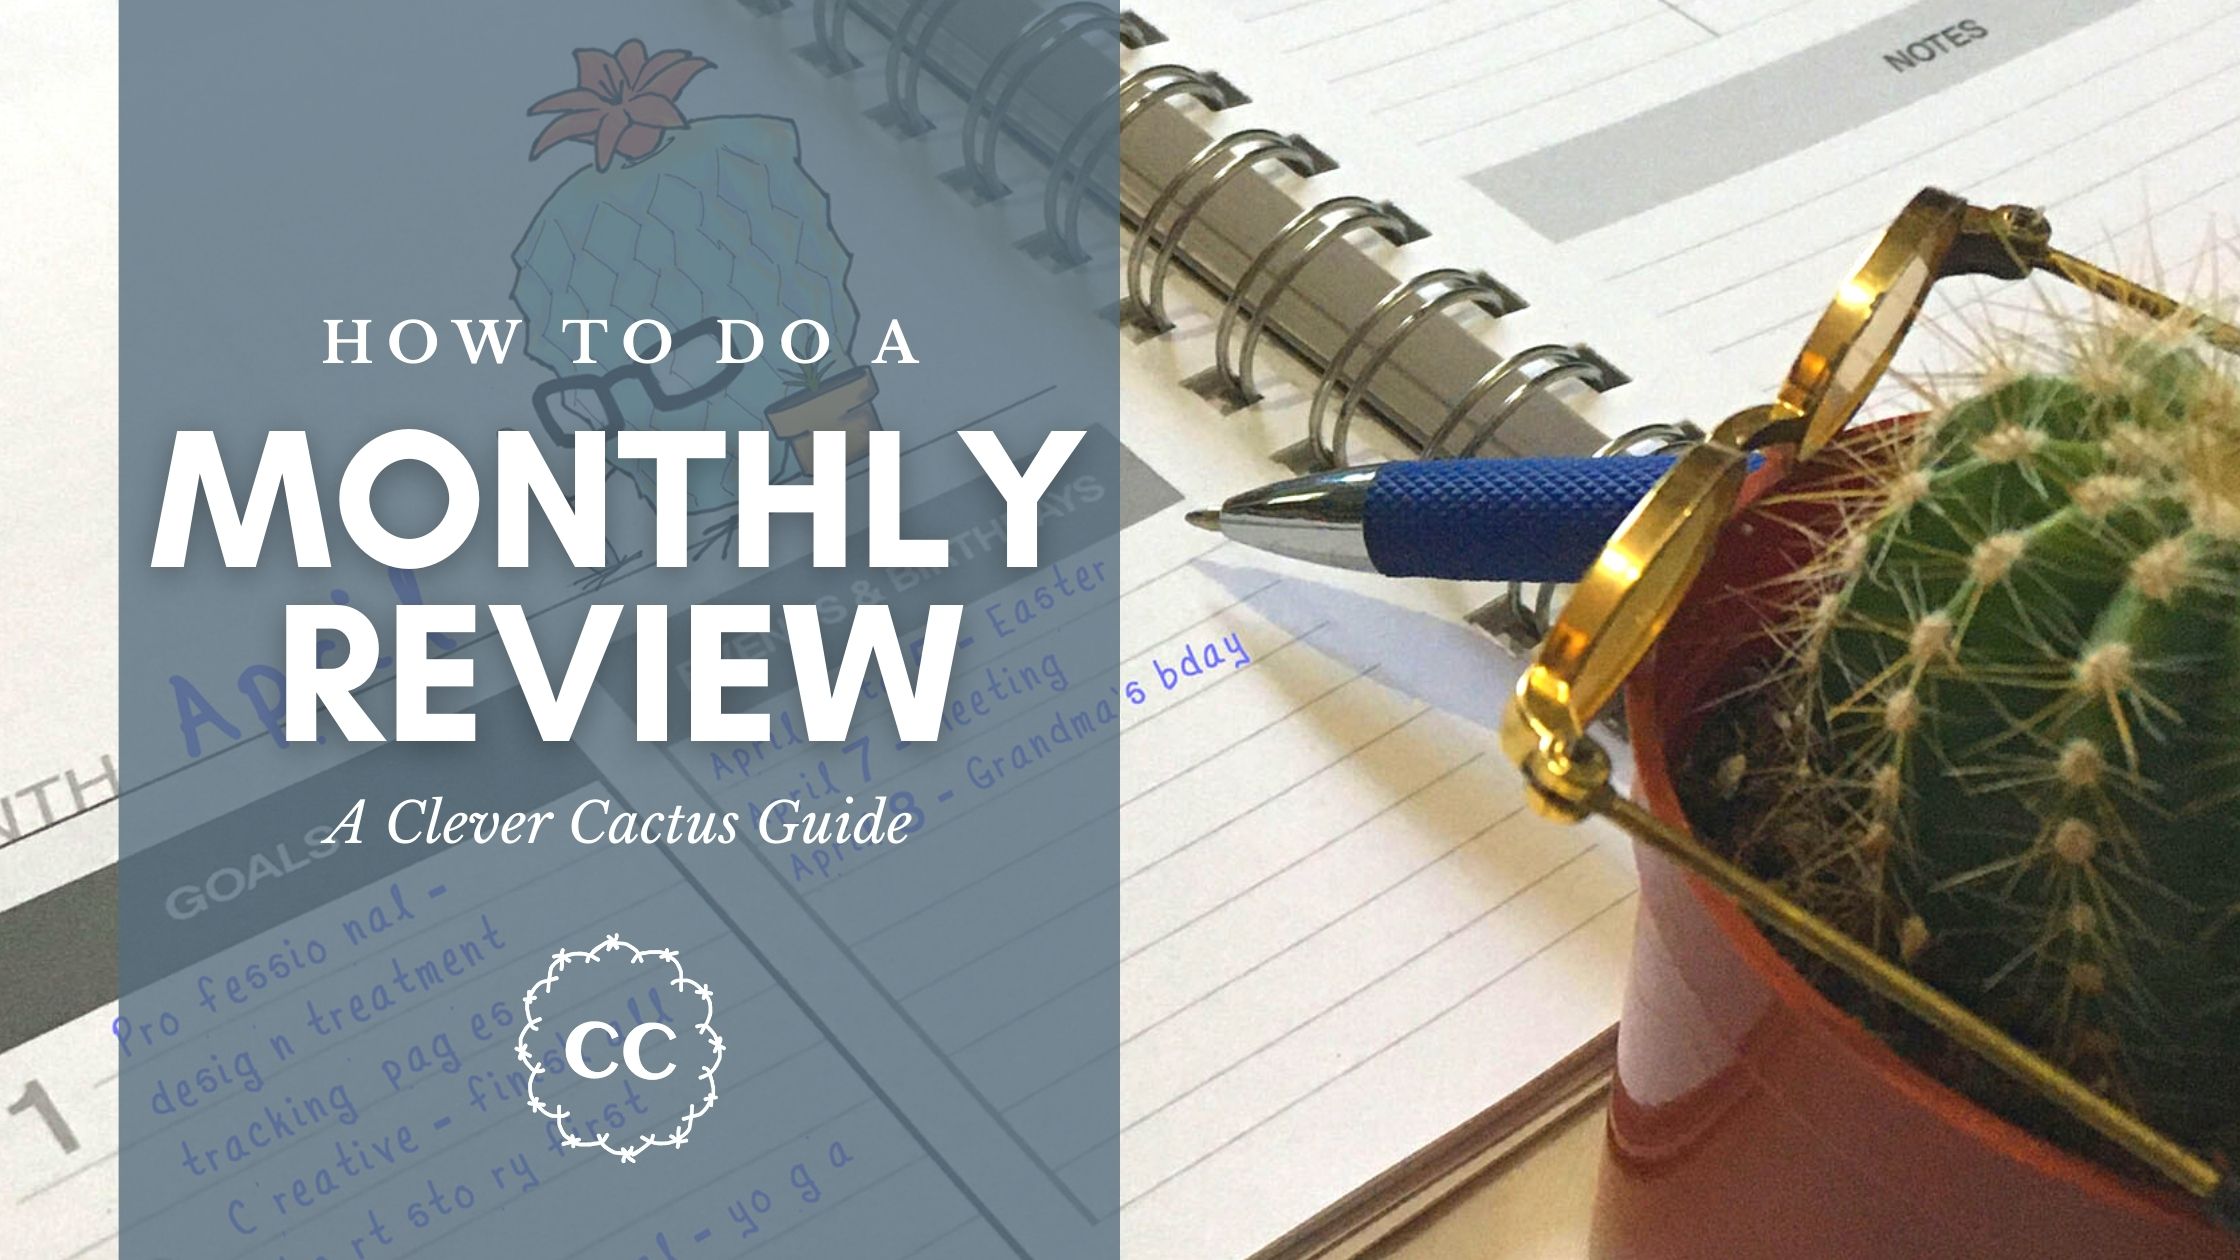 Monthly Review Clever Cactus Guide lead image